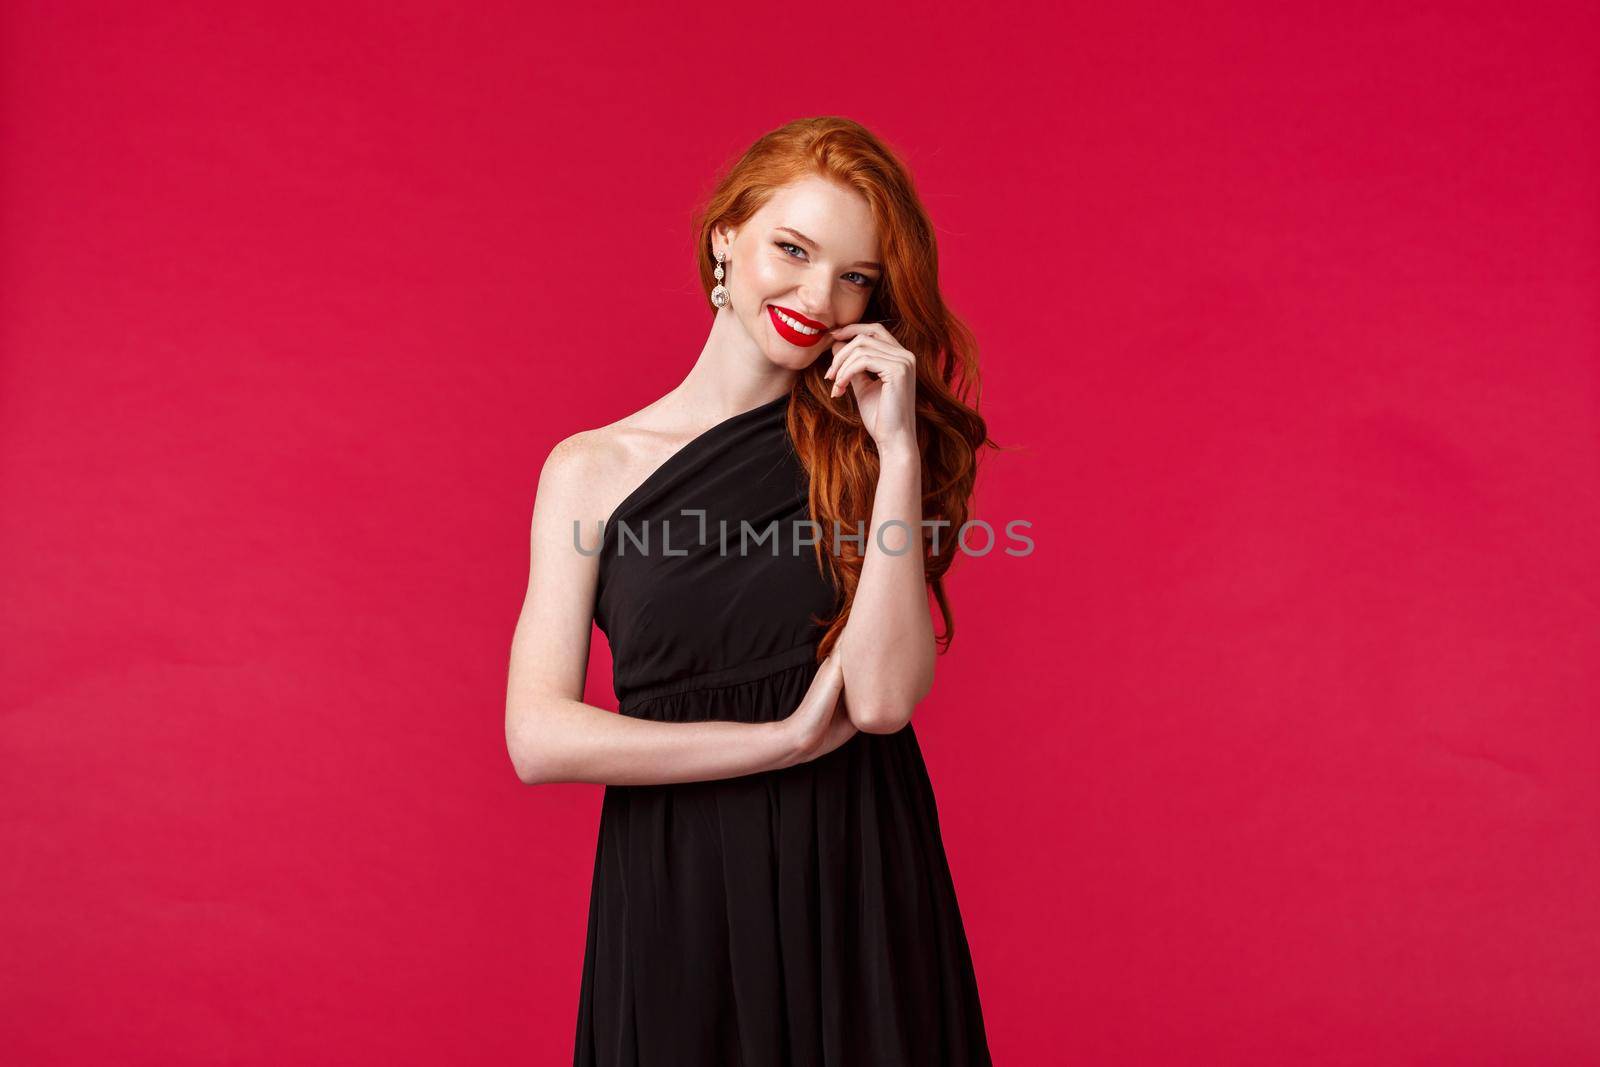 Elegance, fashion and woman concept. Portrait of seducative and sensual woman with ginger hair in elegant evening black dress, attend prom or party, wearing red lipstick, smiling coquettish.